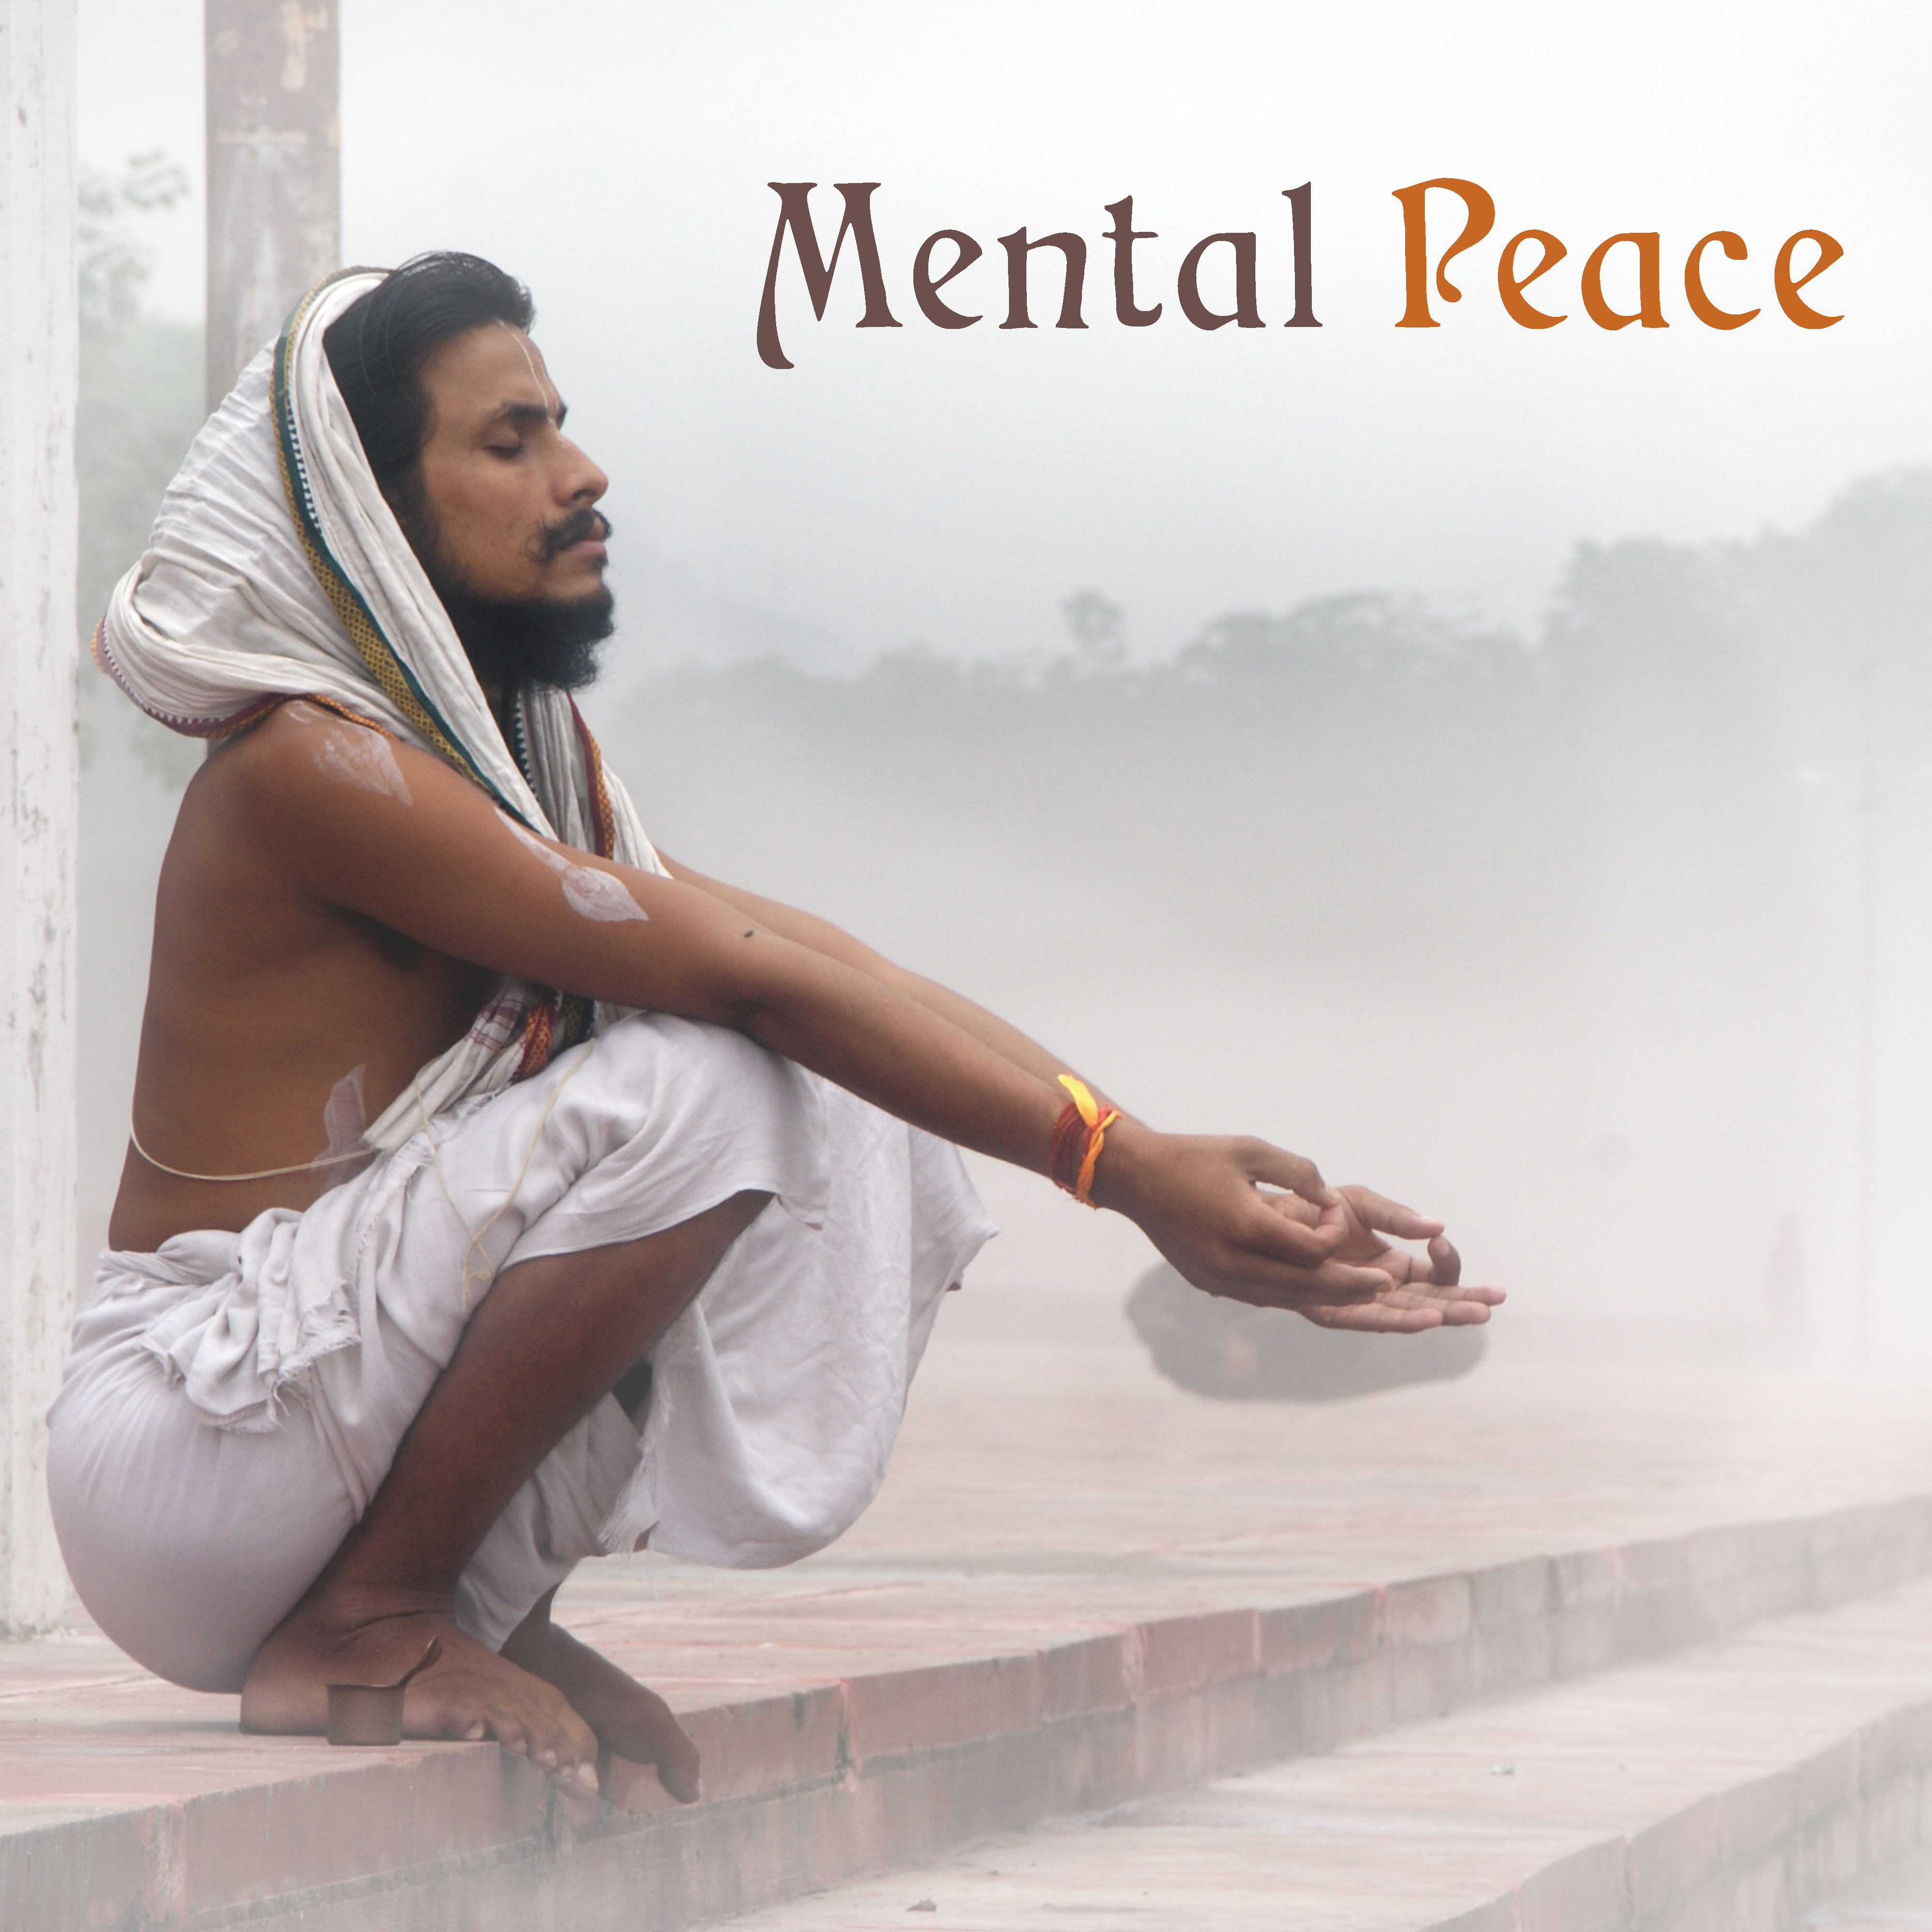 Mental Peace – New Age Music for Yoga Meditation, Rest, Zen, Mantra Relaxation